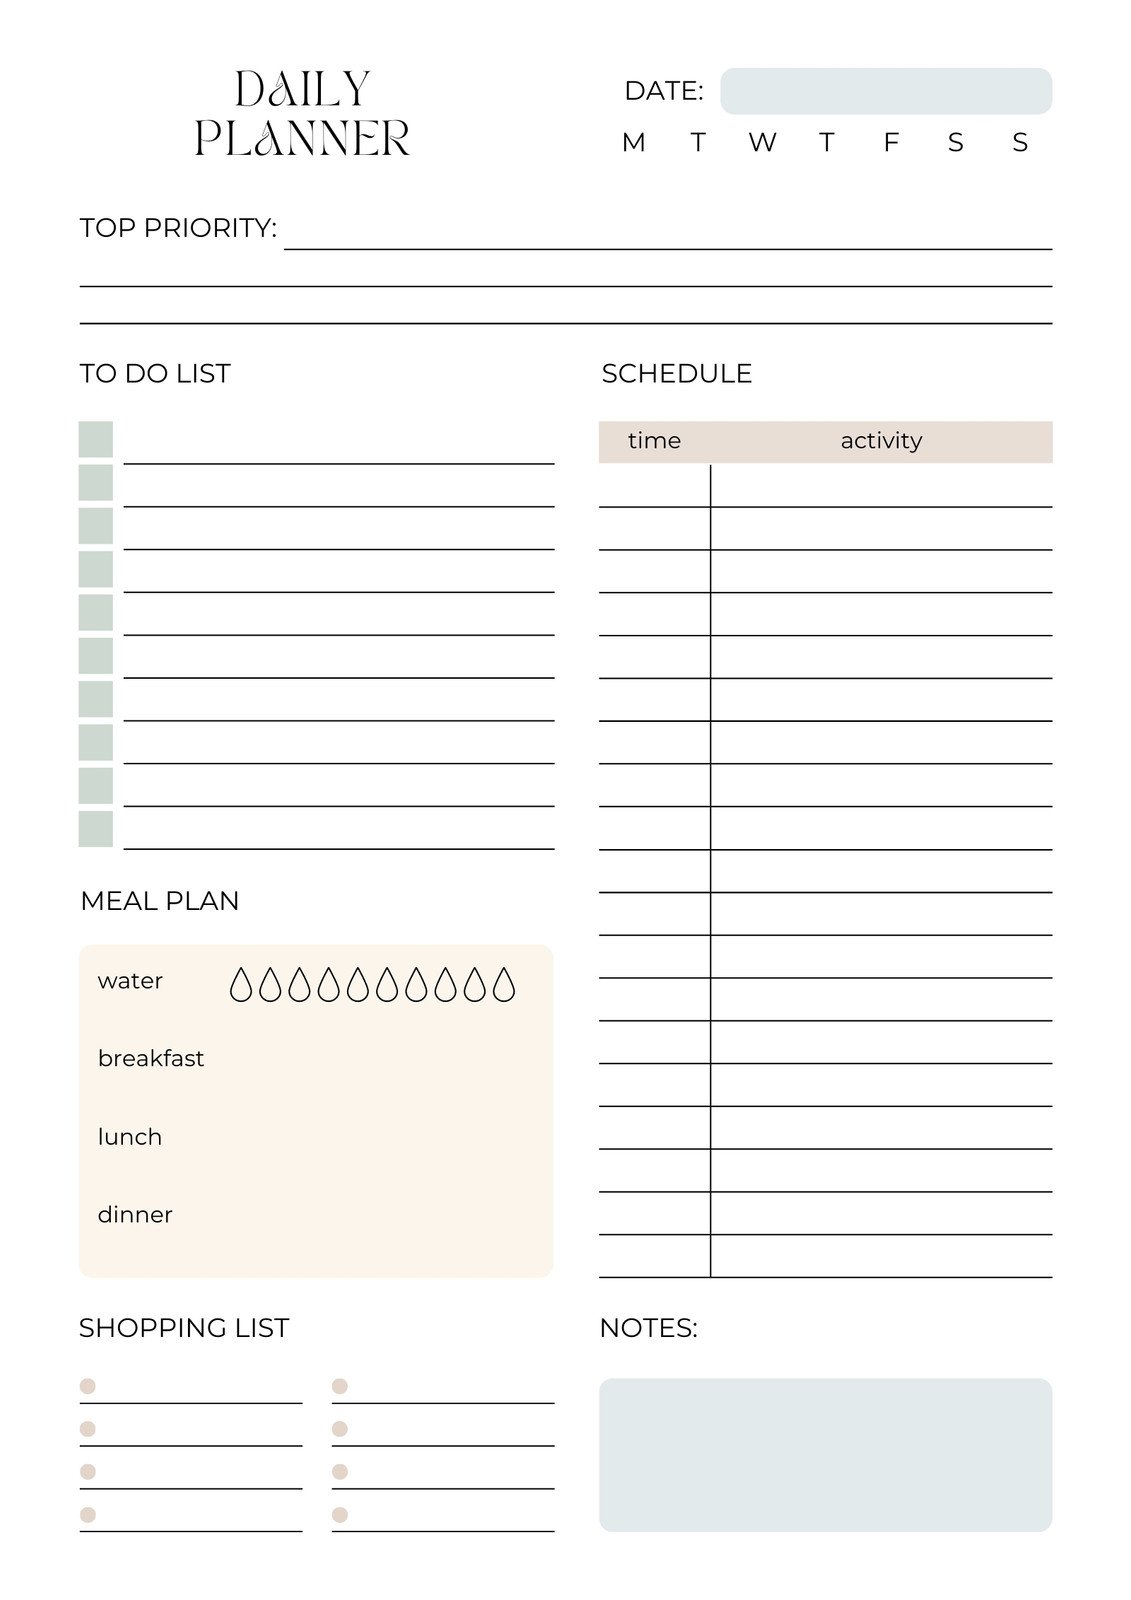 Download Printable Daily Planner Templates 5 in 1 Bundle PDF